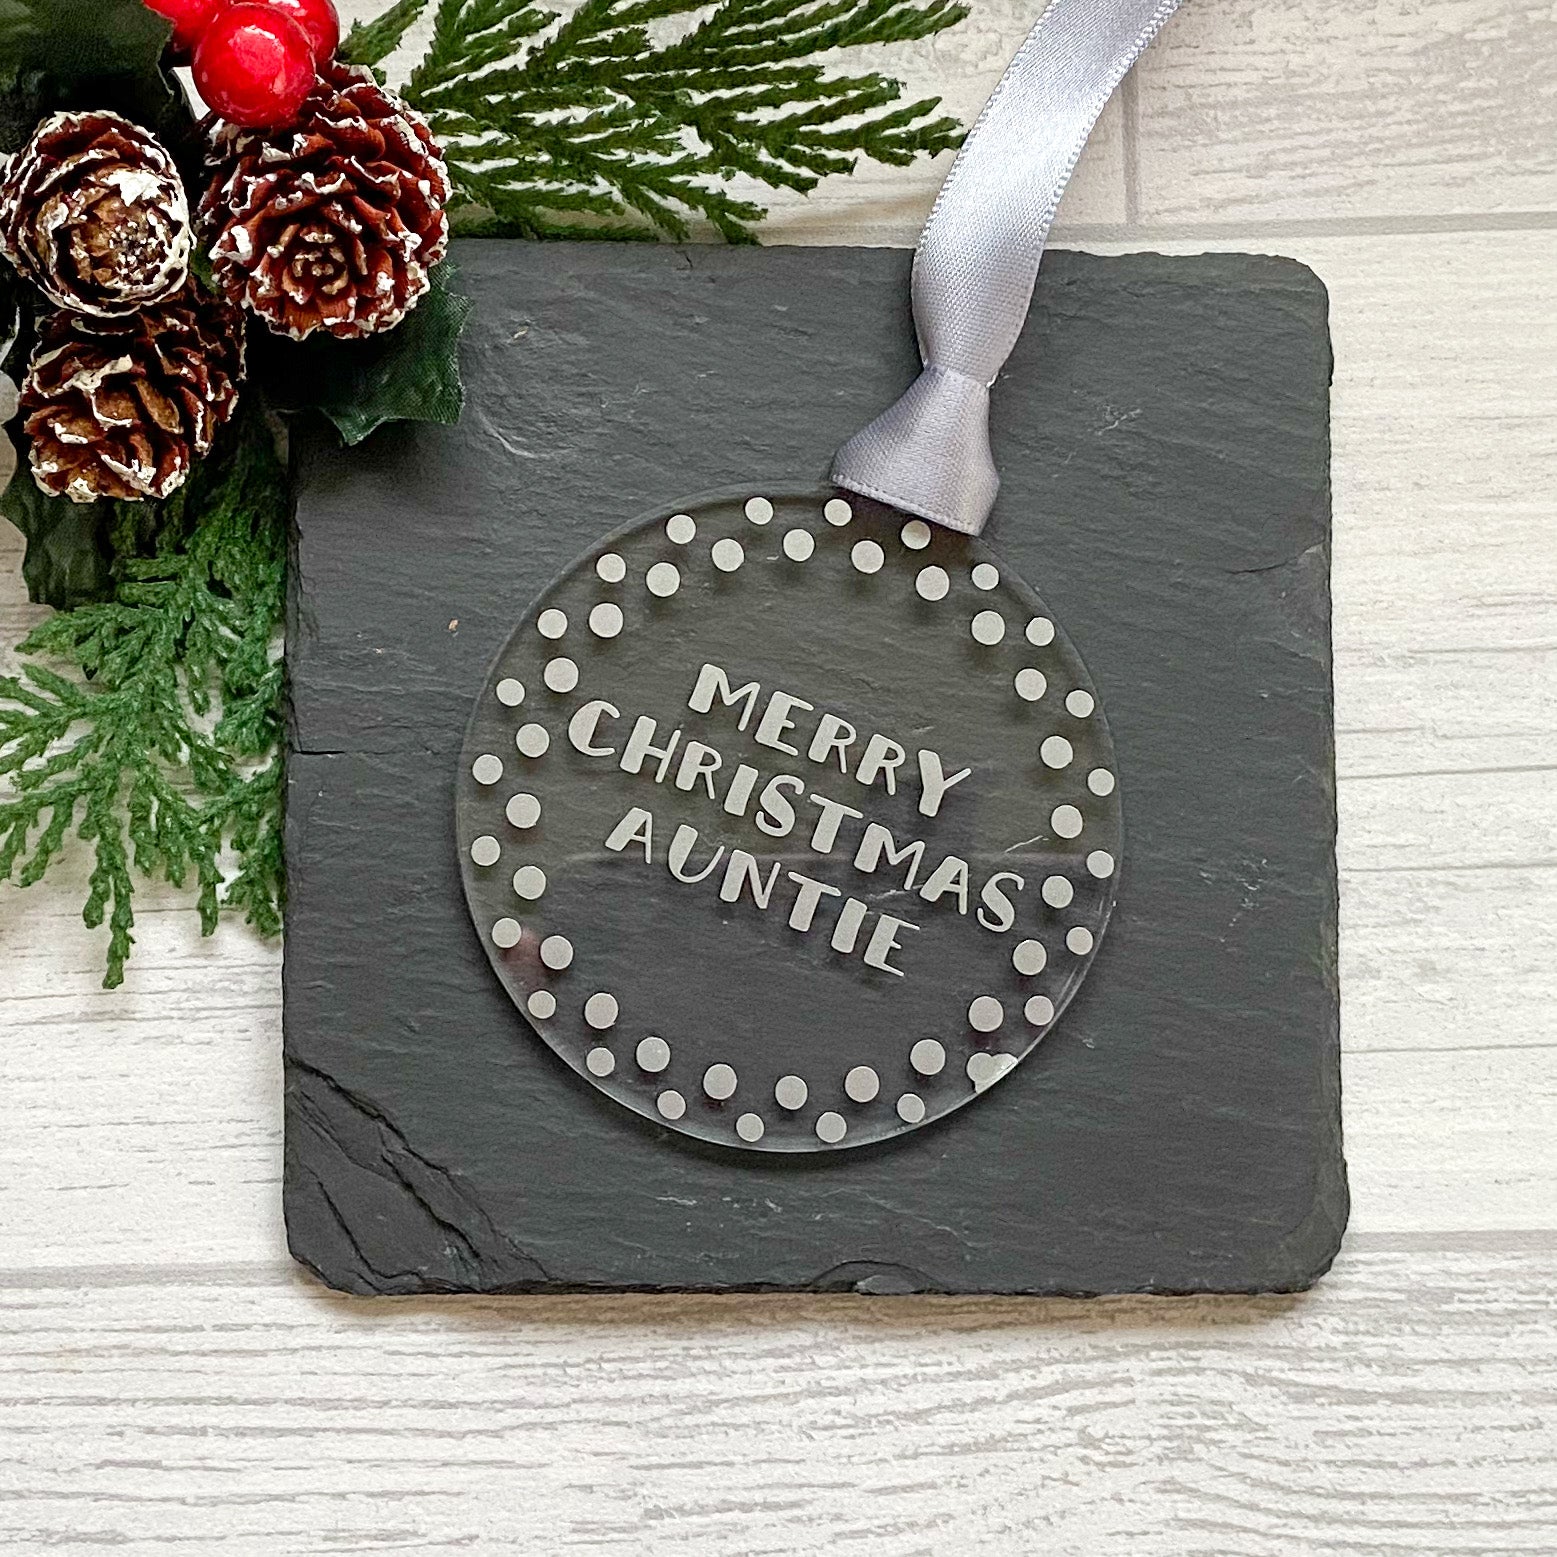 Sew Lovely - Christmas Tree Decoration - Merry Christmas Auntie